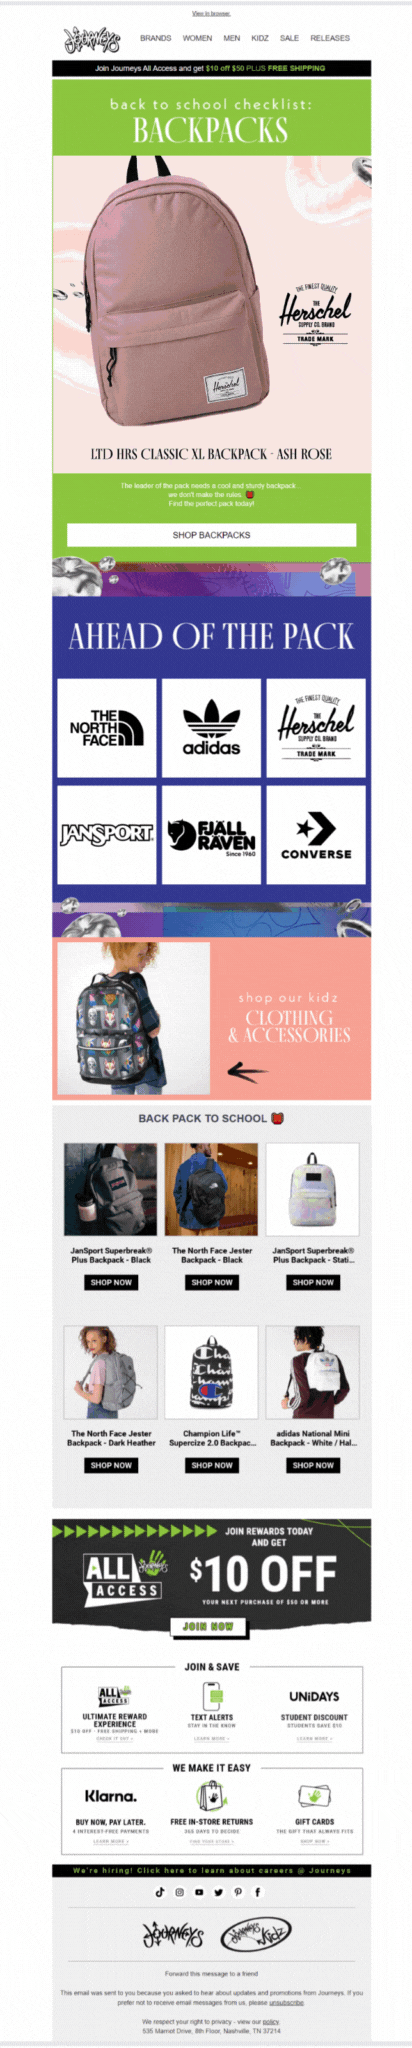 Email from Journeys promoting backpacks that make you “ahead of the pack” and features a GIF showcasing a variety of backpacks from Kanken, The North Face, Converse, Vans, and more